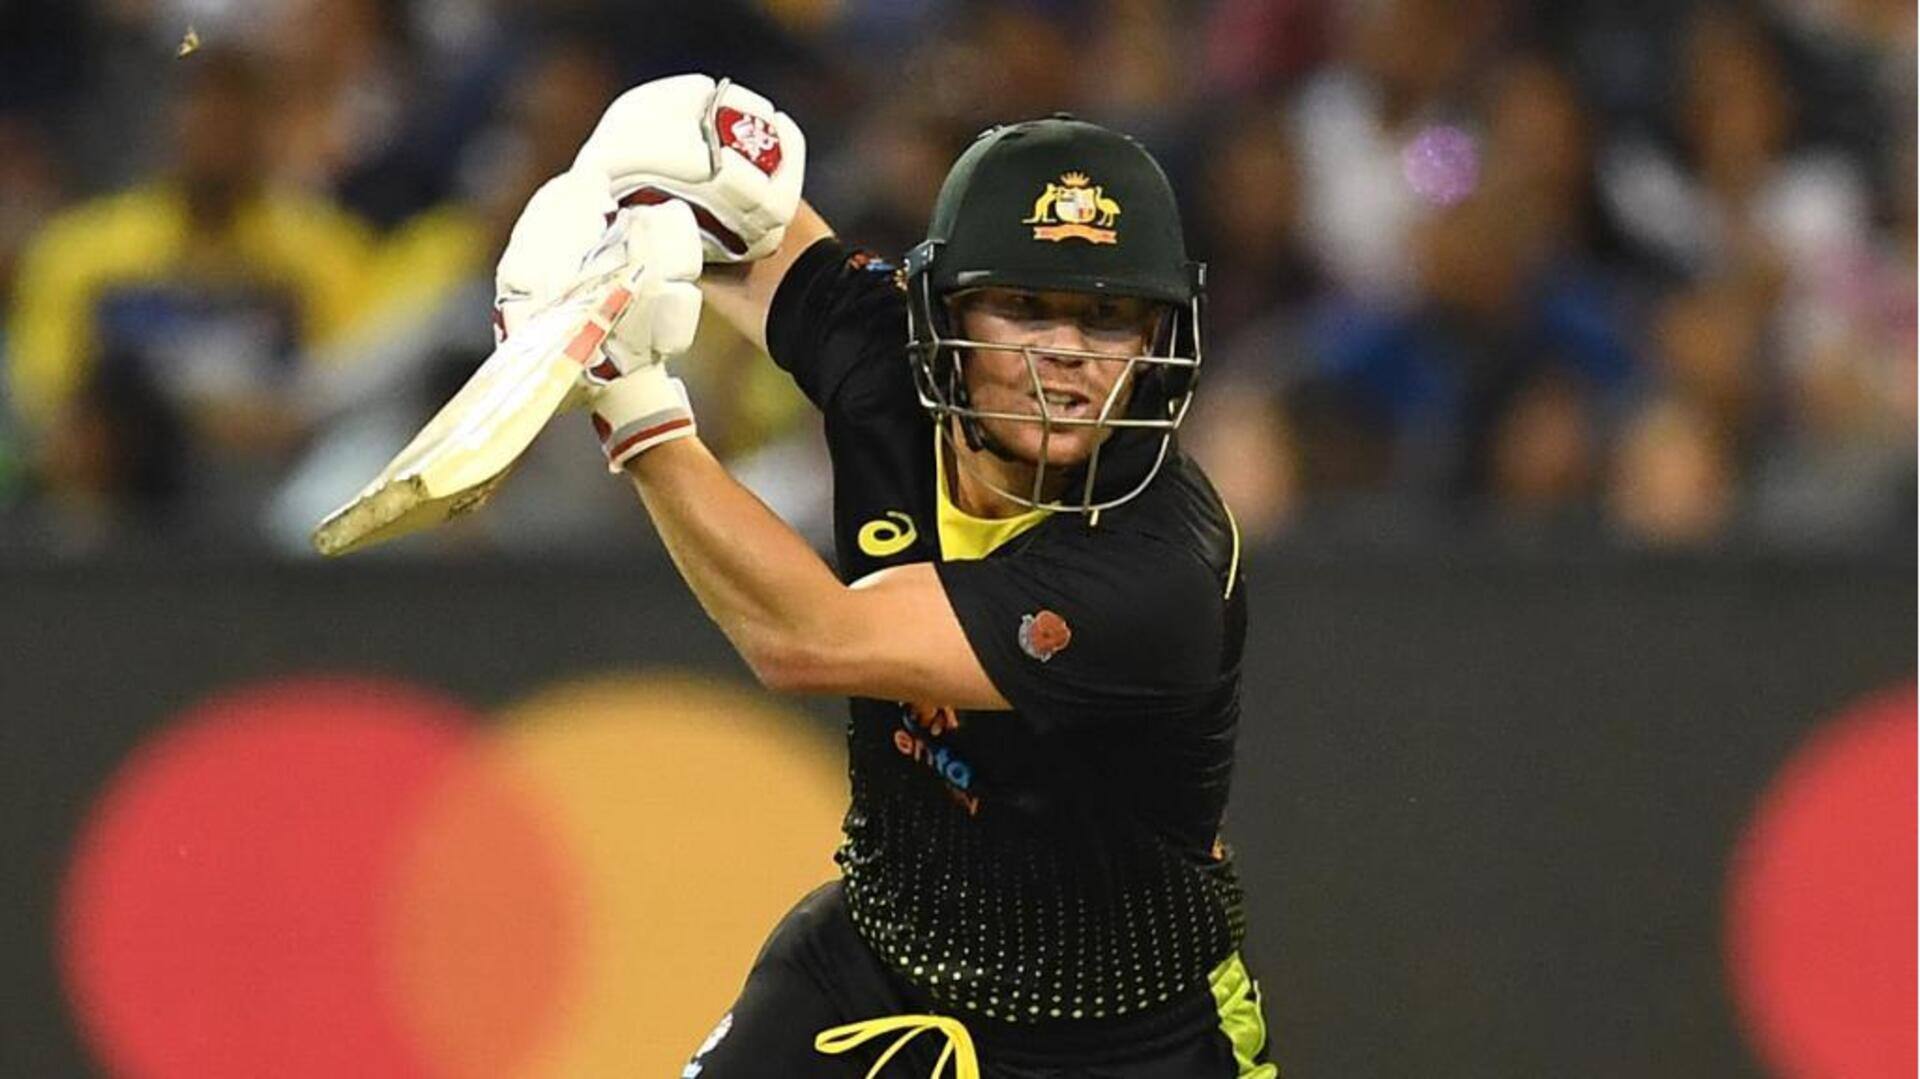 David Warner features in his 100th T20I for Australia: Stats